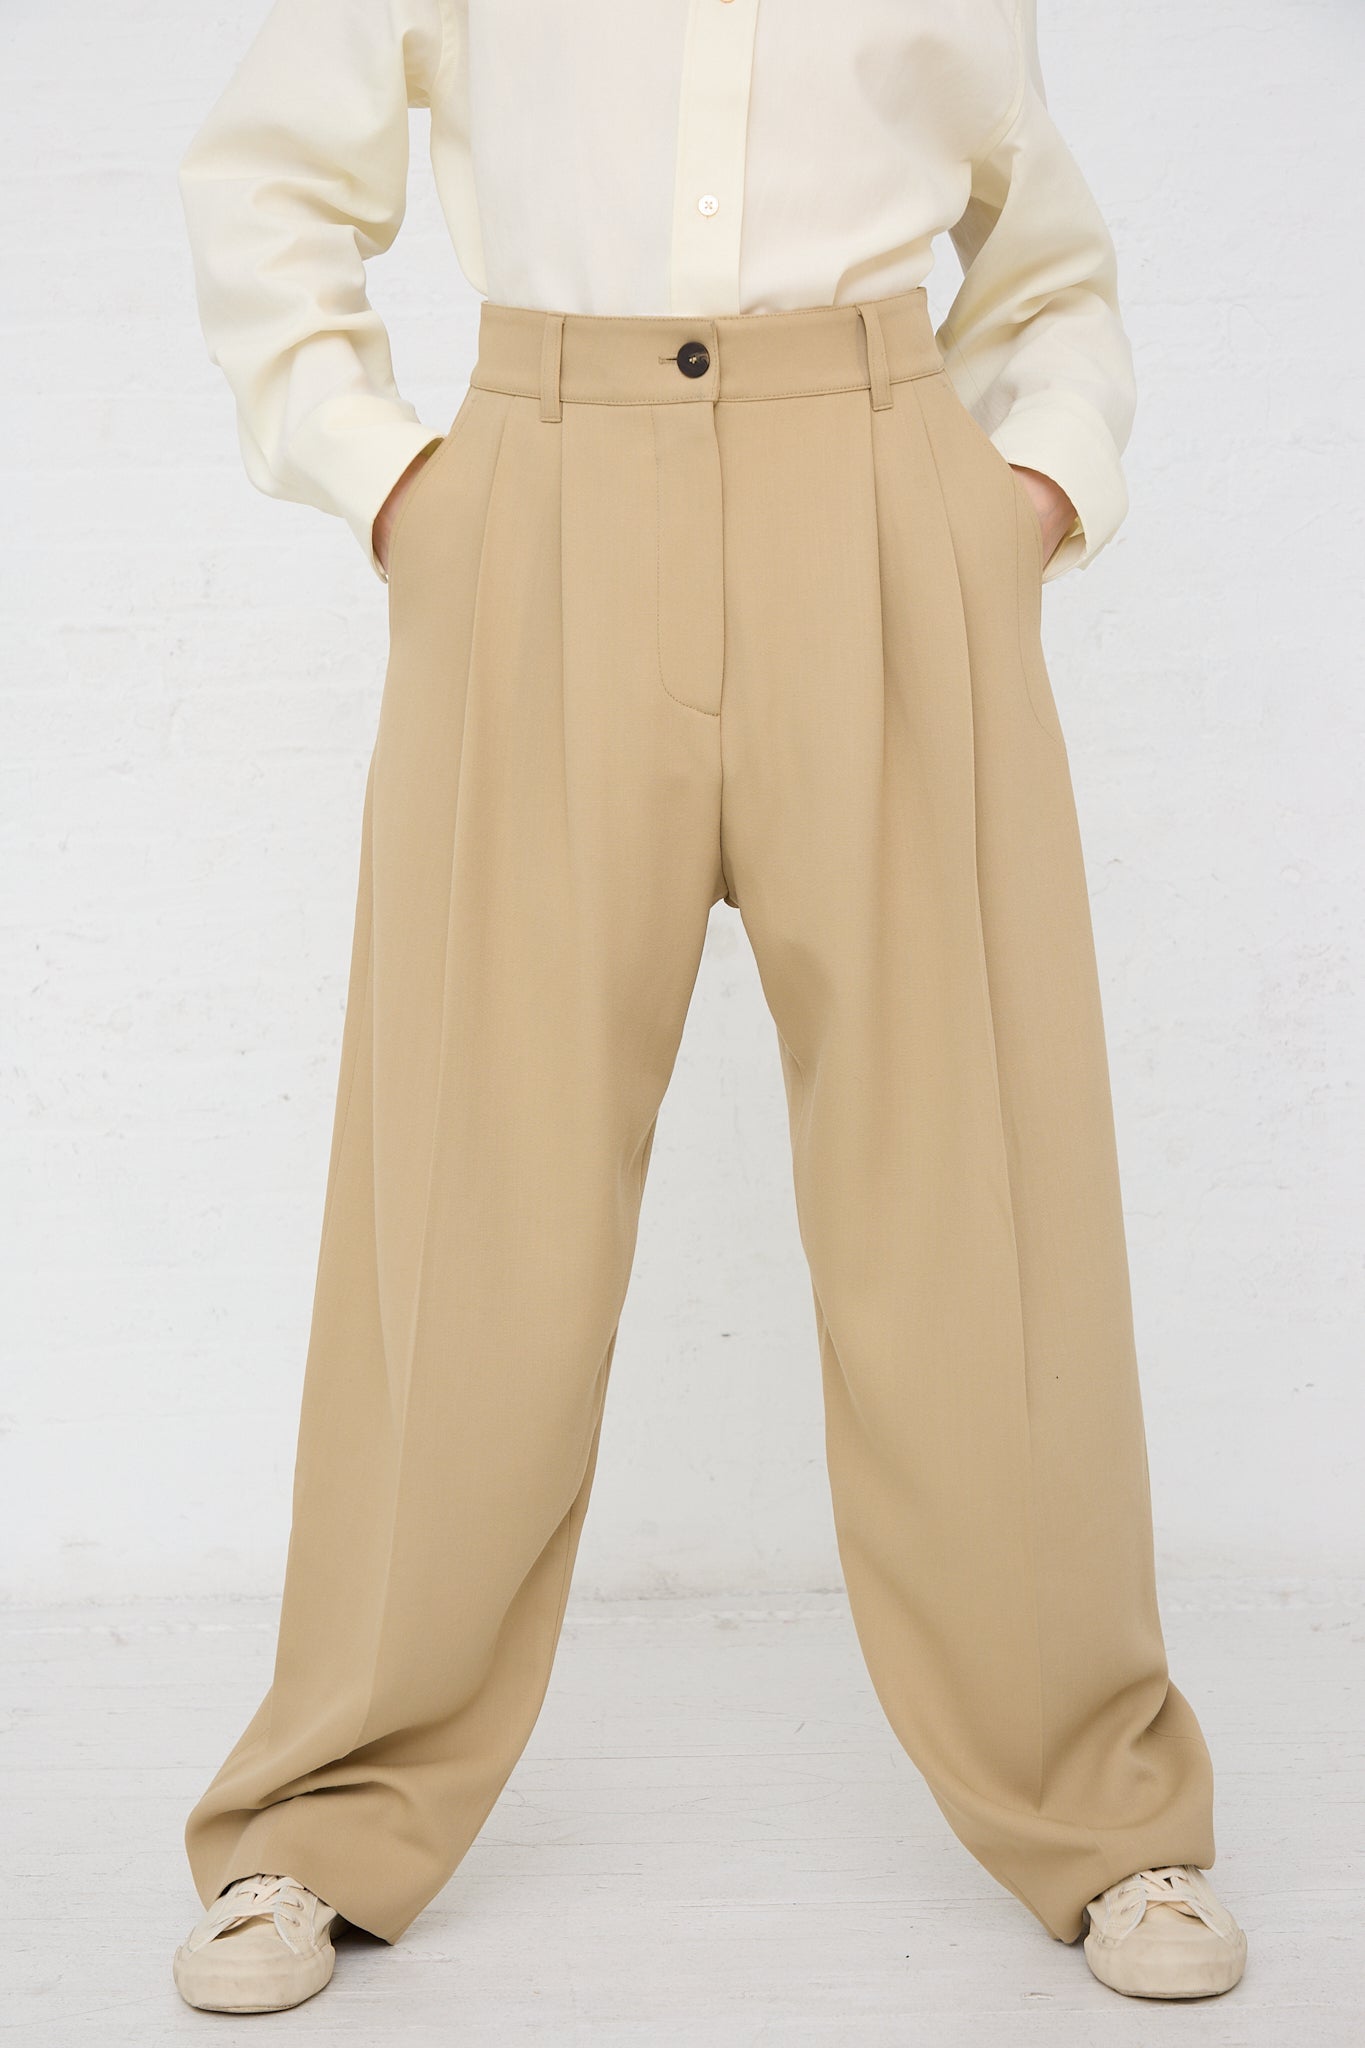 A model in a white shirt and **Acuna Double Pleat Front Trouser in Sand** by Studio Nicholson. Front view. Model's hands are in pockets.